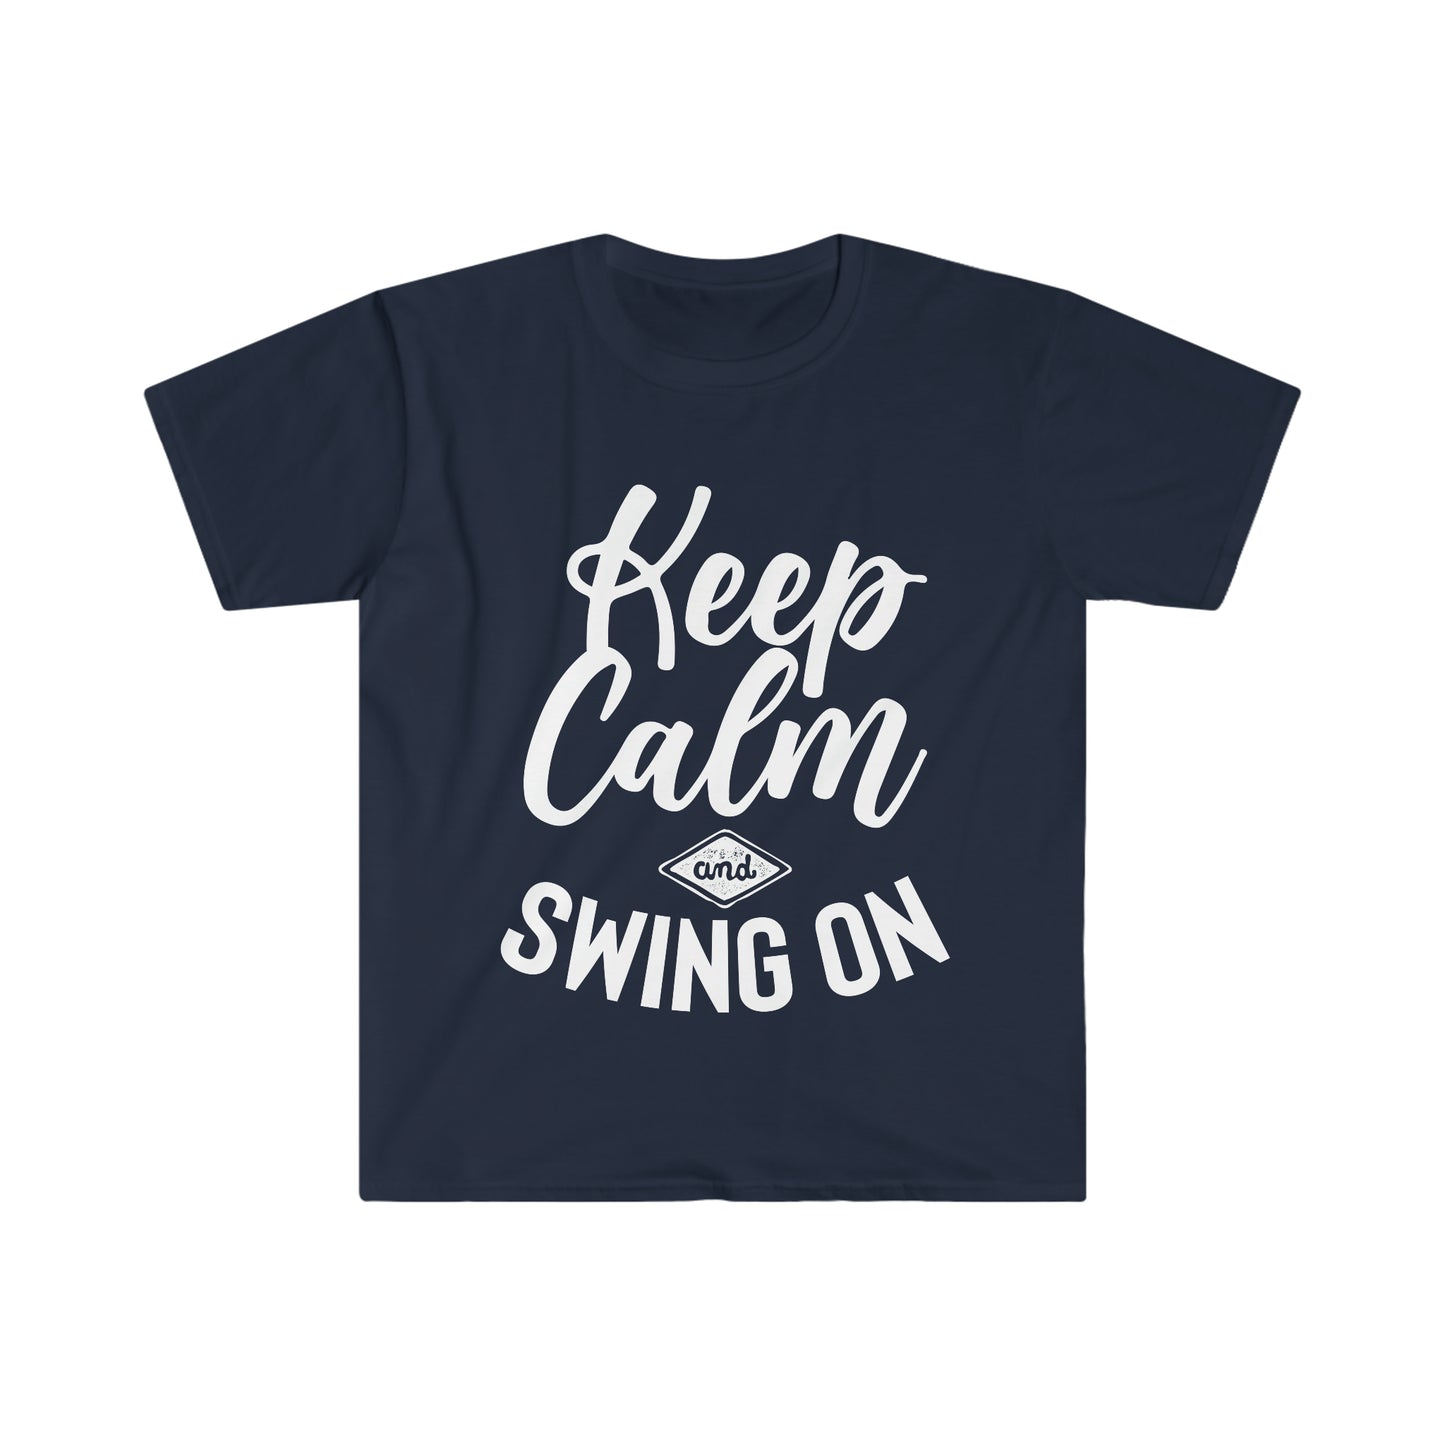 Keep Calm And Swing On Unisex Softstyle T-Shirt